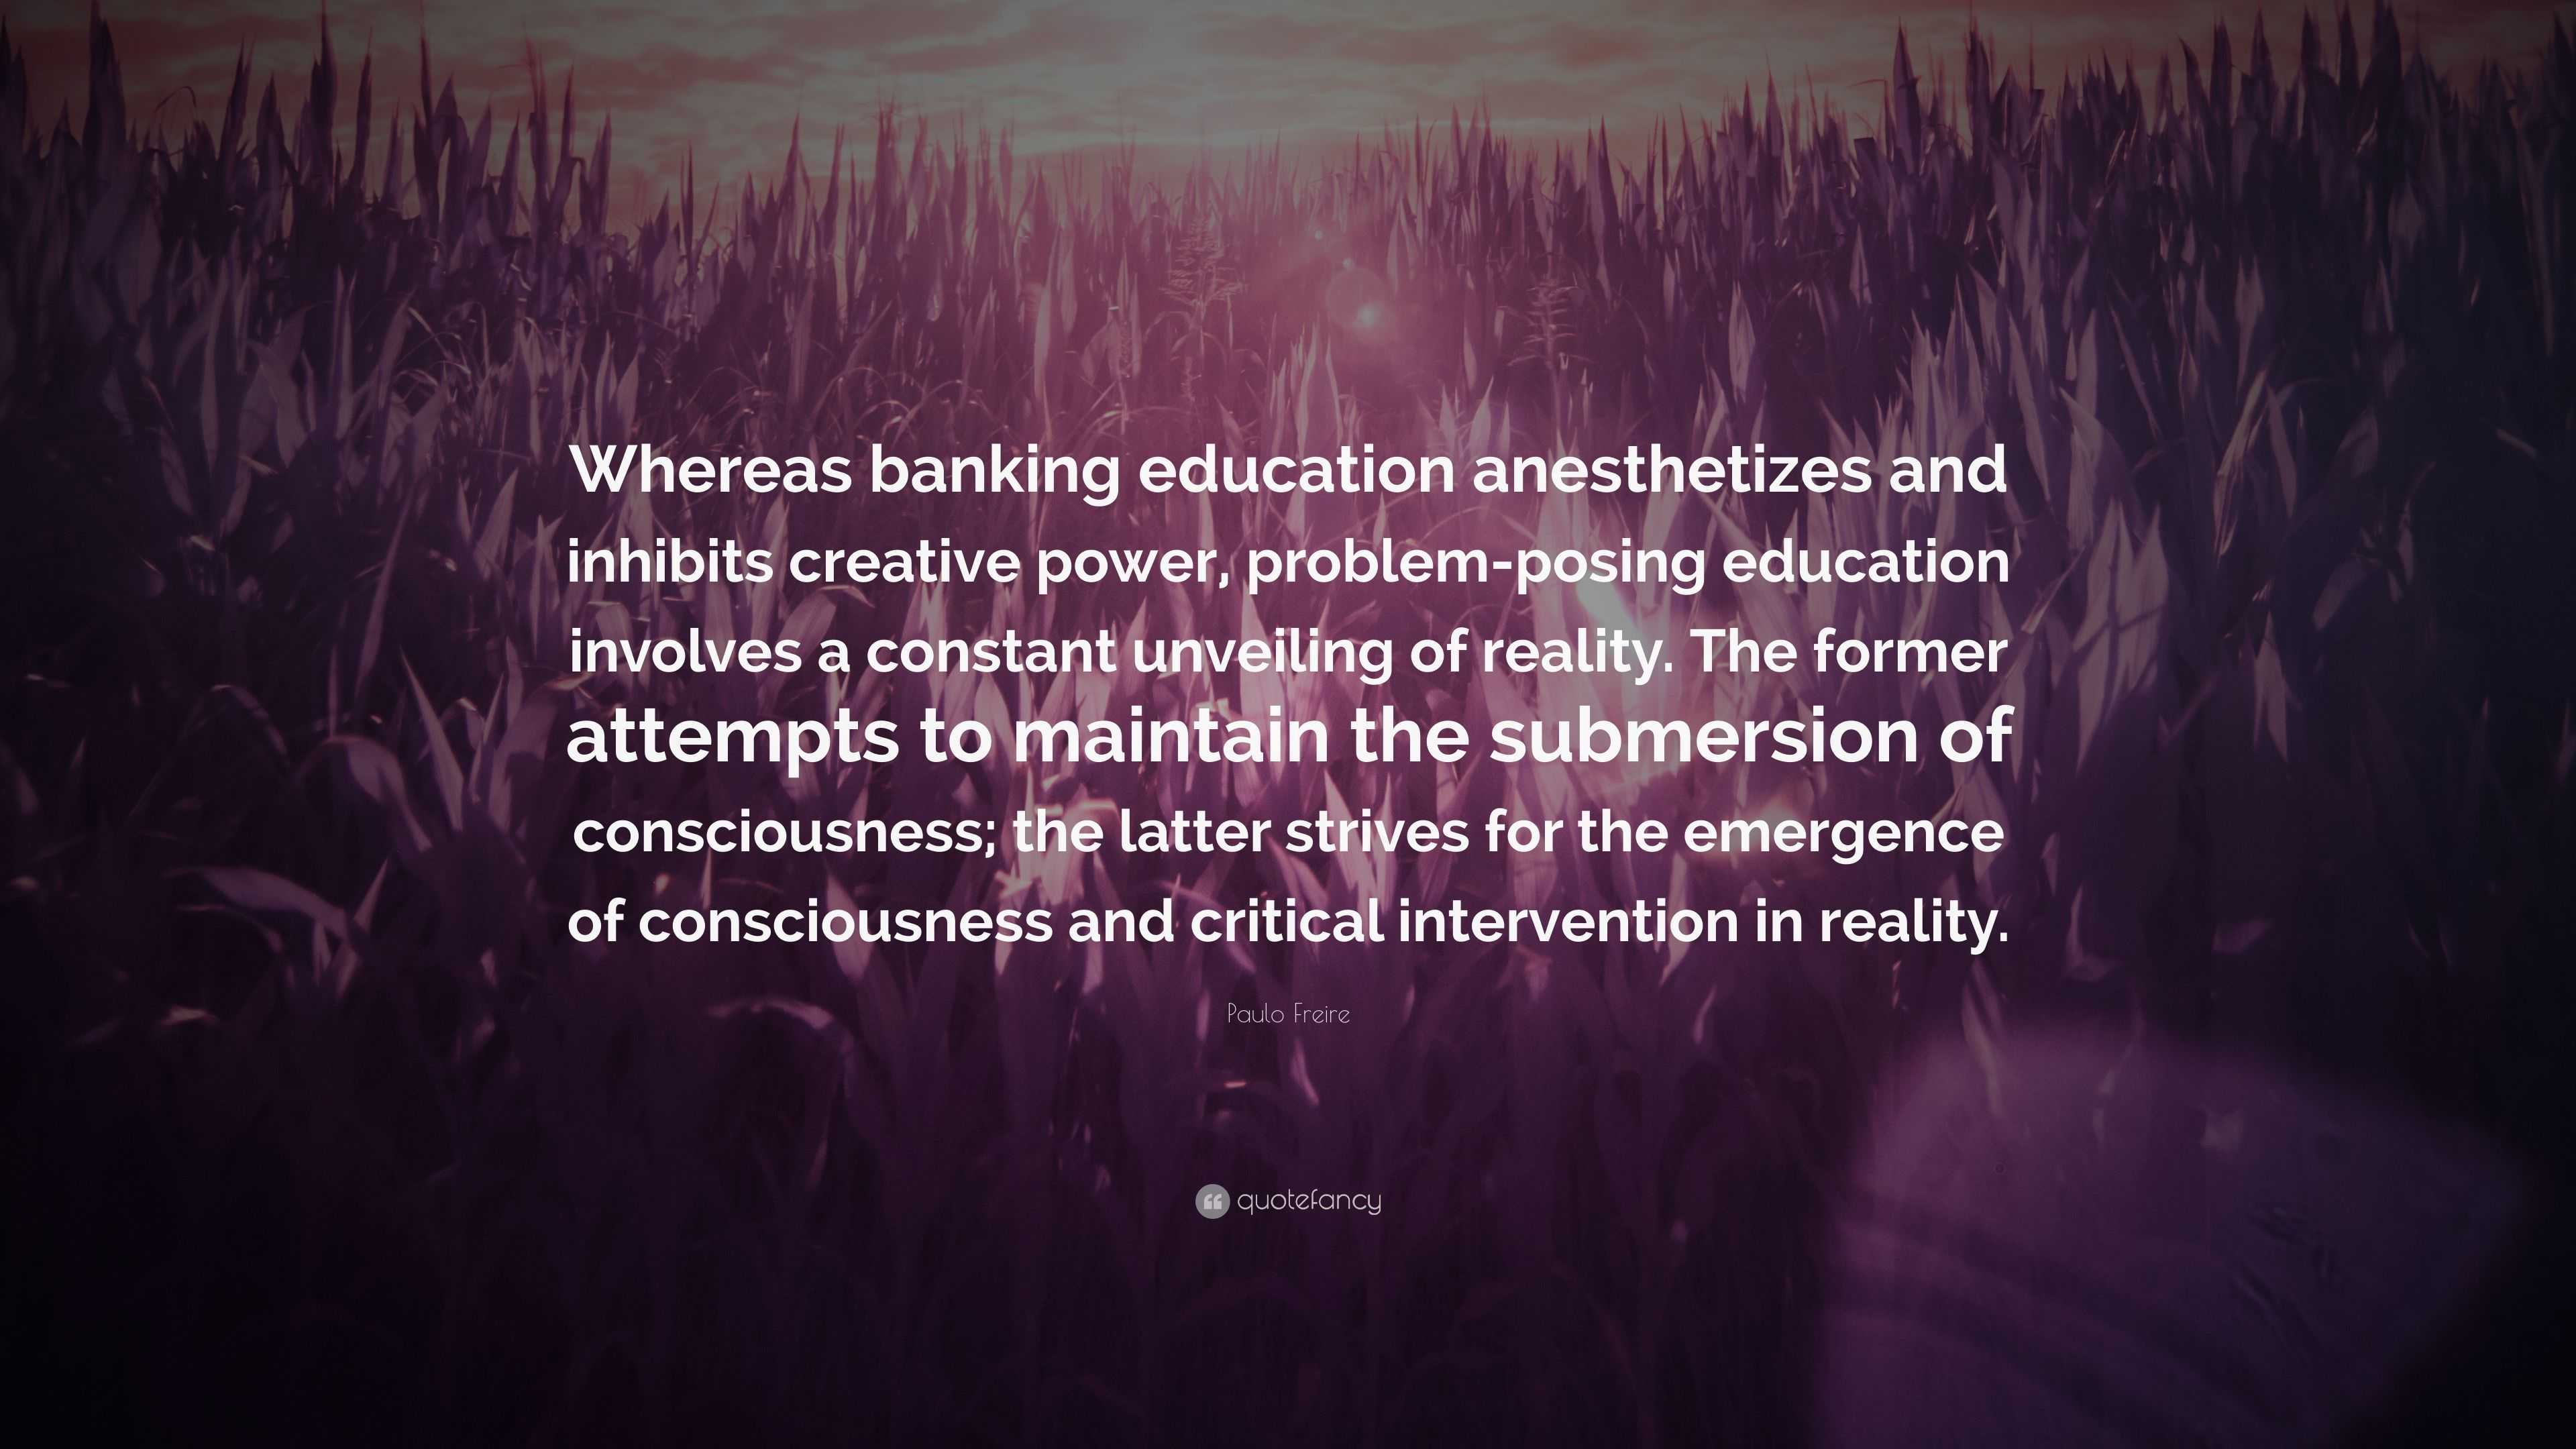 Paulo Freire Quote: “Whereas banking education anesthetizes and